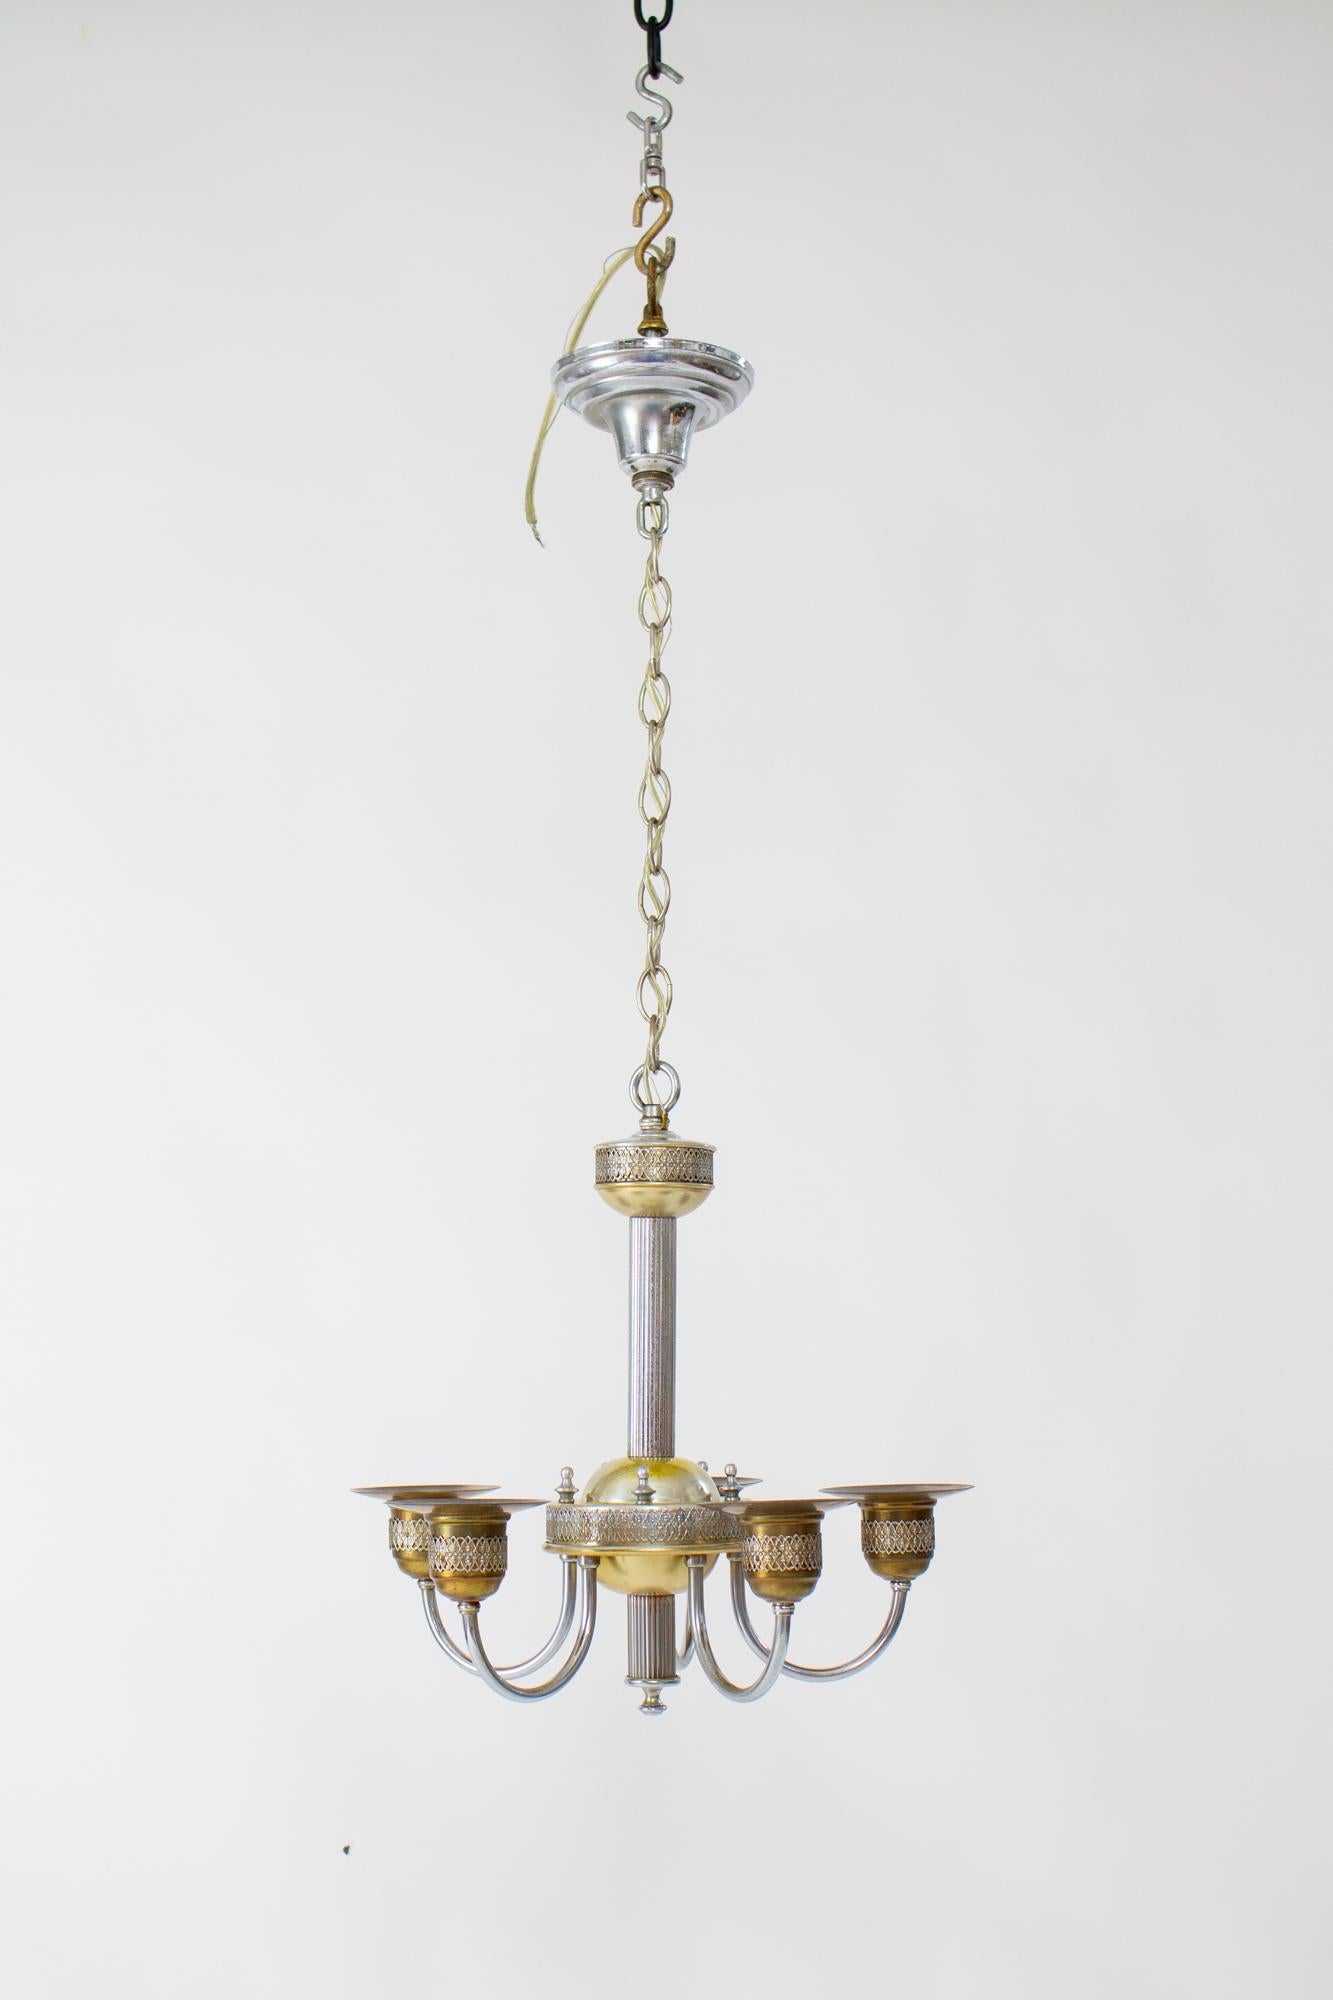 1930’s Art Deco Chandelier with Iridescent Glass For Sale 1